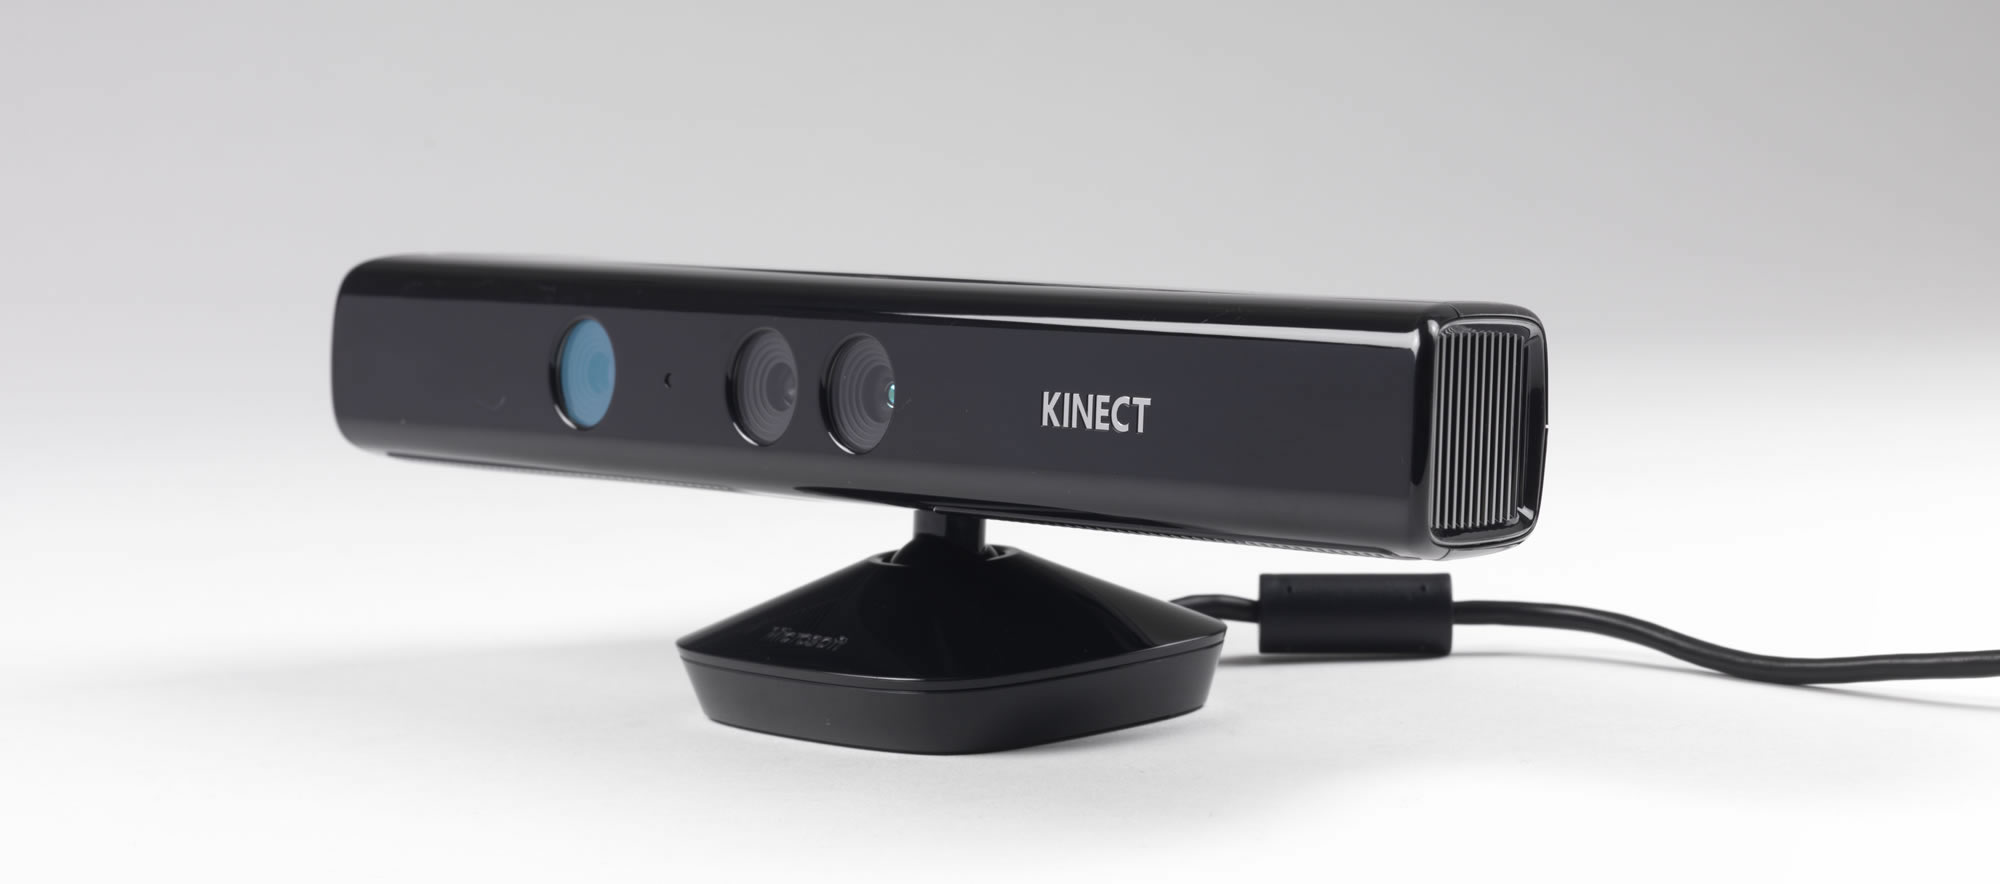 Microsoft Kinect - The Interface Experience: Bard Graduate Center